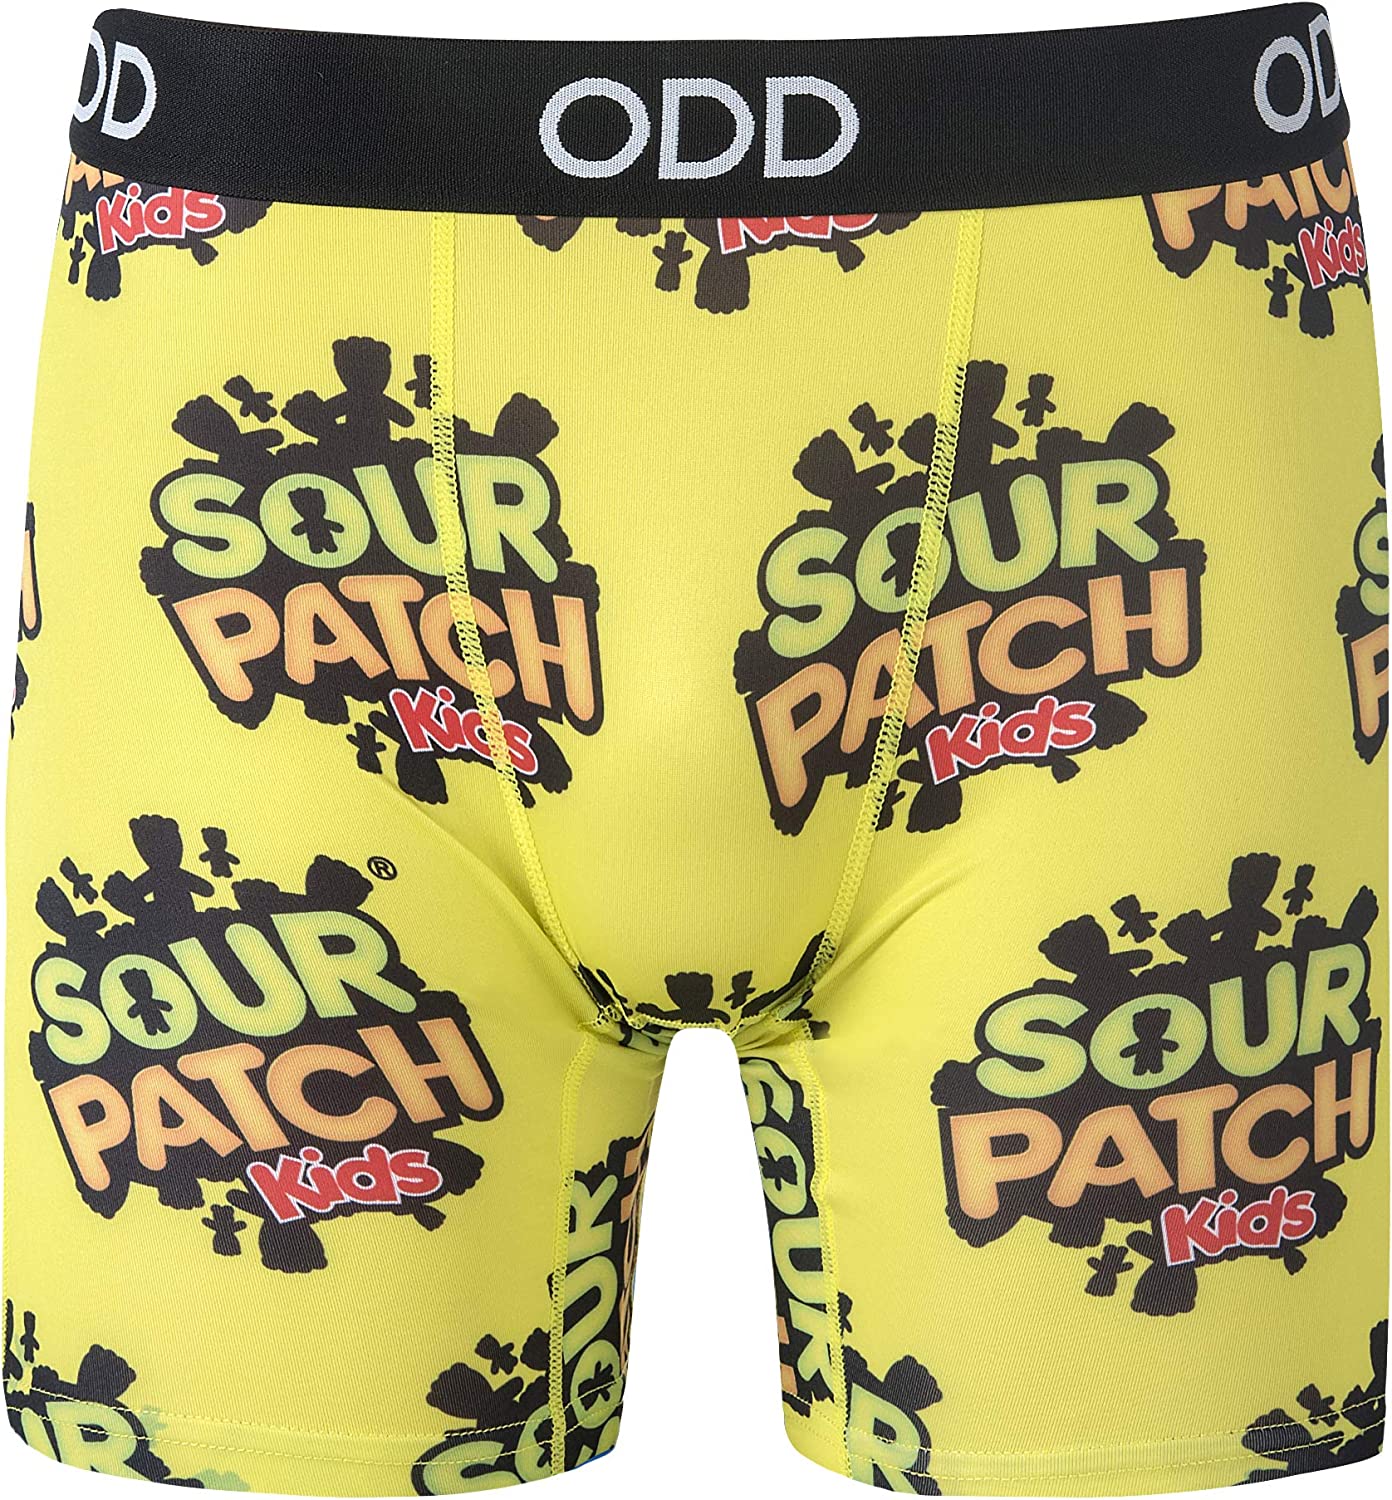 Odd Sox, Frosted Flakes, Men's Boxer Briefs, Funny Novelty Underwear, XX  Large 